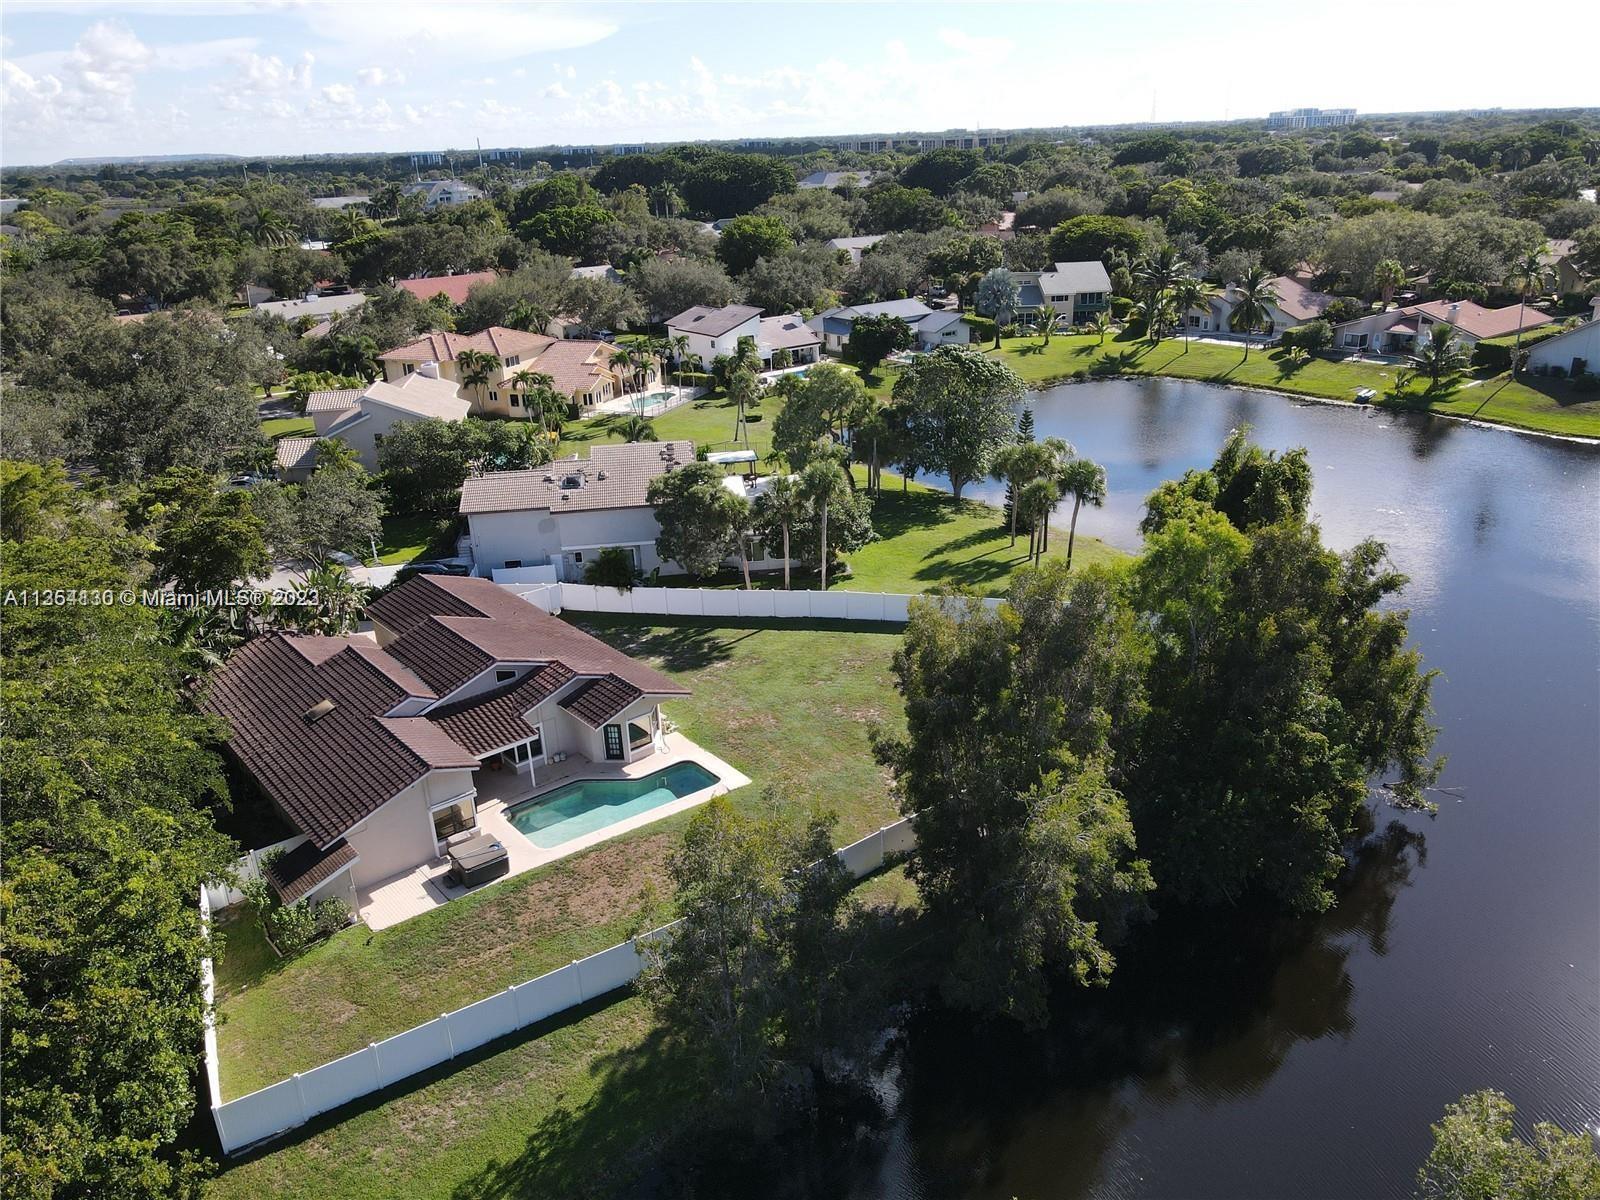 This is a stunning, oversize waterfront & private pool home located in Boca's most desirable neighbo